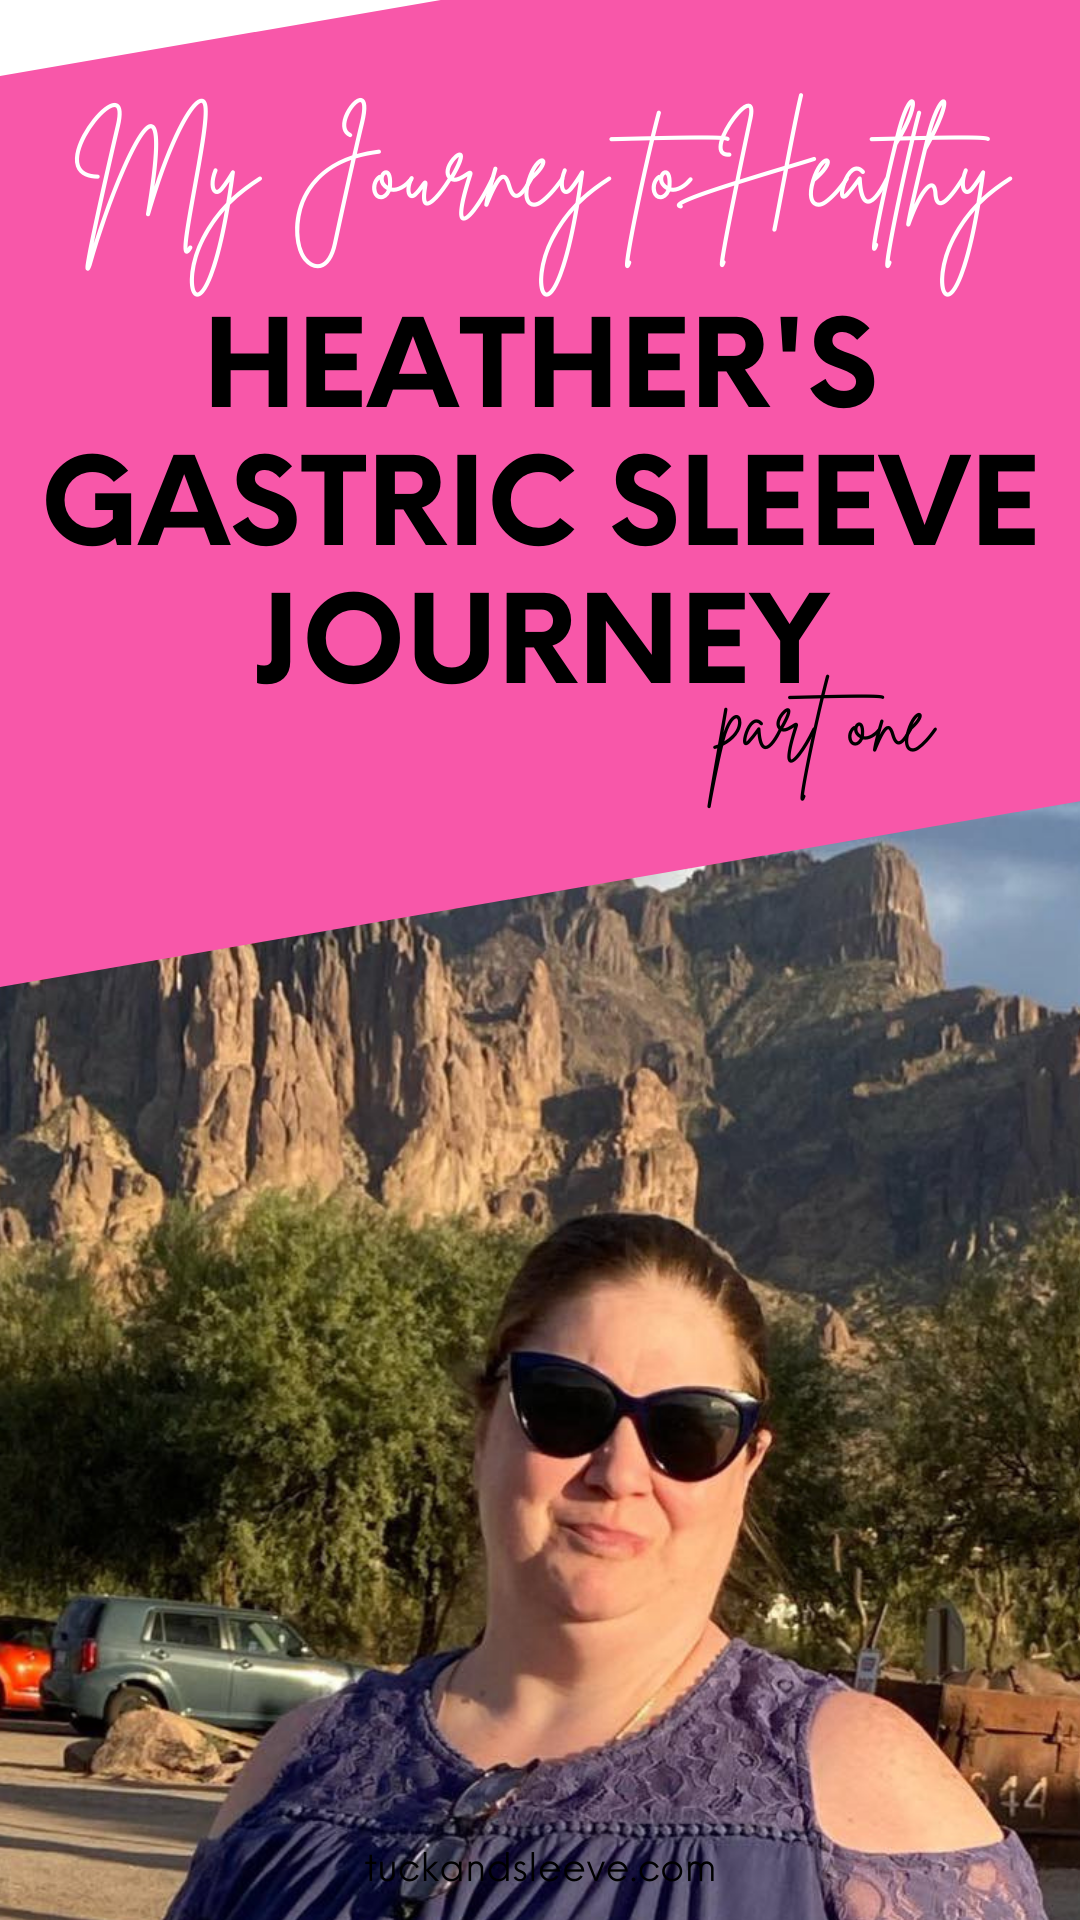 Tuck and Sleeve My Journey To Healthy Heather's Gastric Sleeve Journey